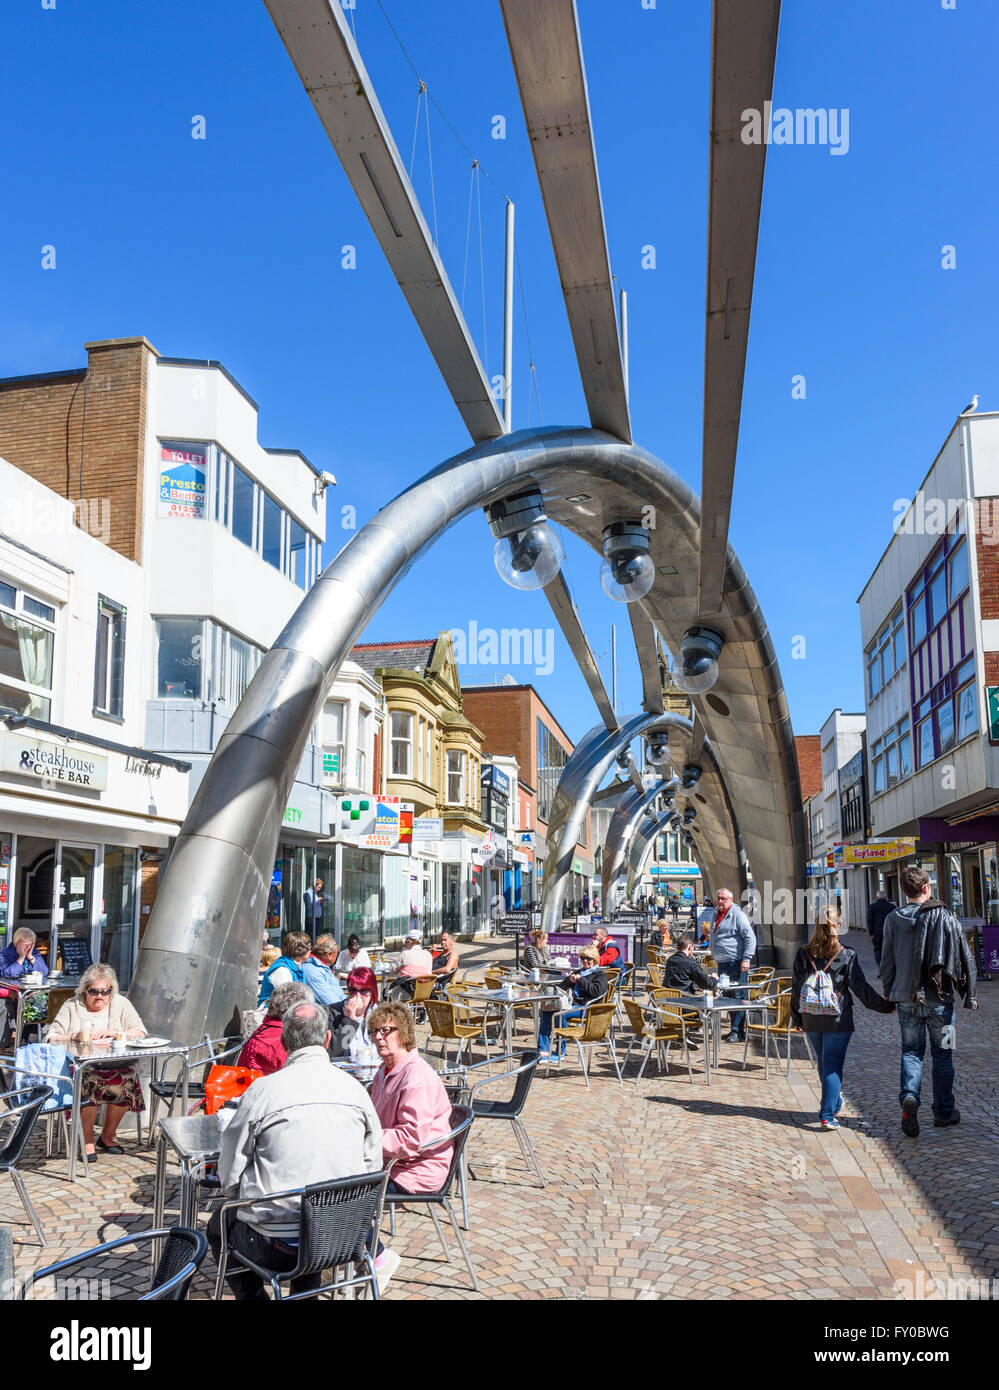 Under a blue sky, tourists drink and eat at cafés in Church Street, Blackpool famous for it's very modern street lighting Stock Photo